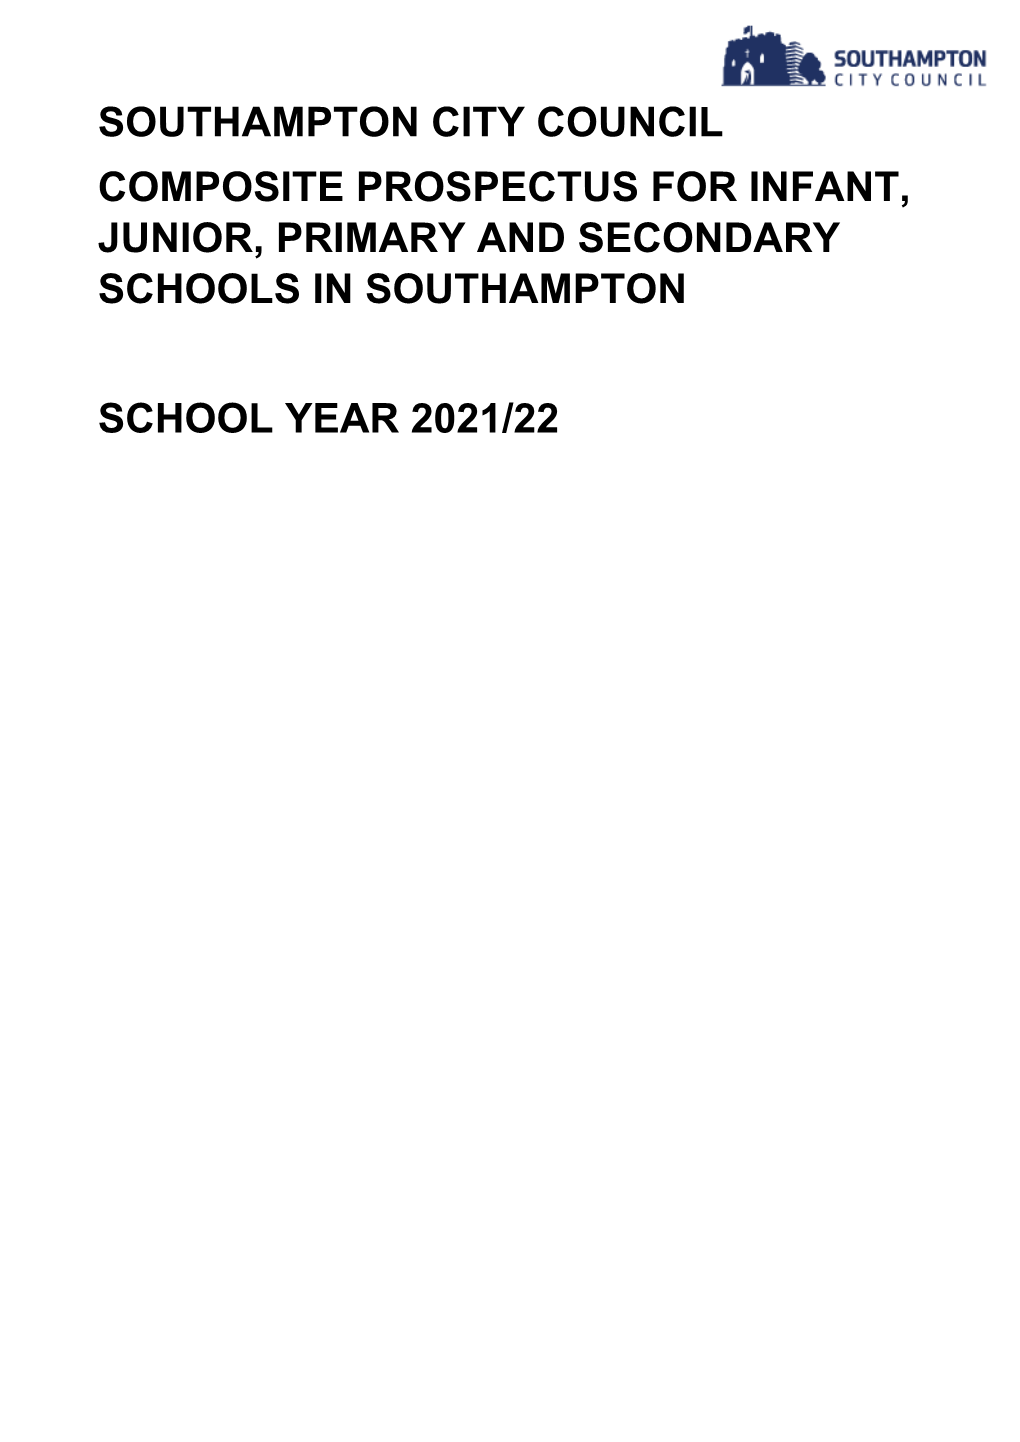 Southampton City Council Composite Prospectus for Infant, Junior, Primary and Secondary Schools in Southampton